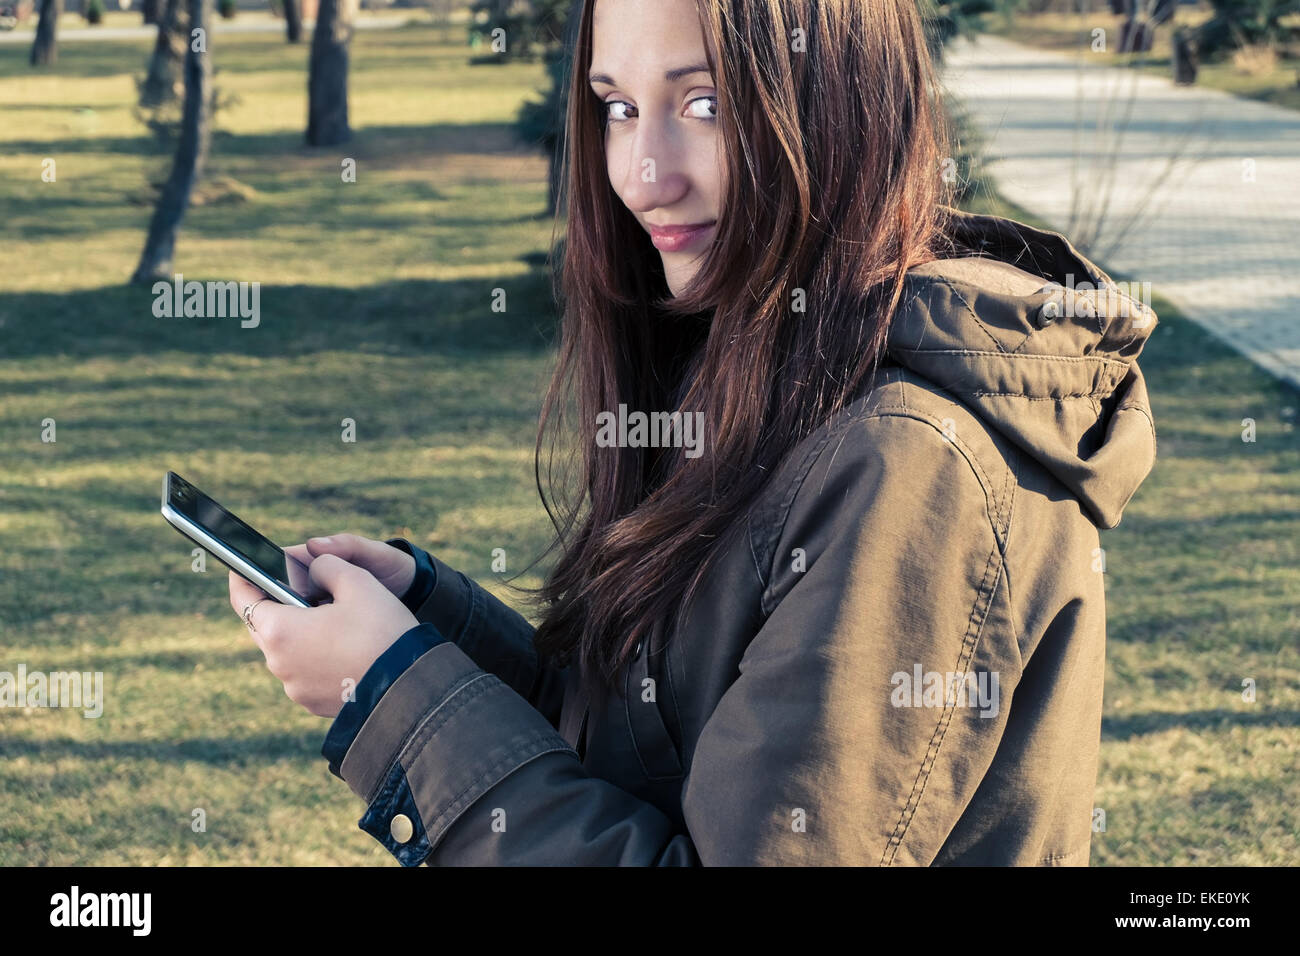 Young girl posing outdoors with tablet PC in her hands and look back. Toned colorized image, film like color. Stock Photo